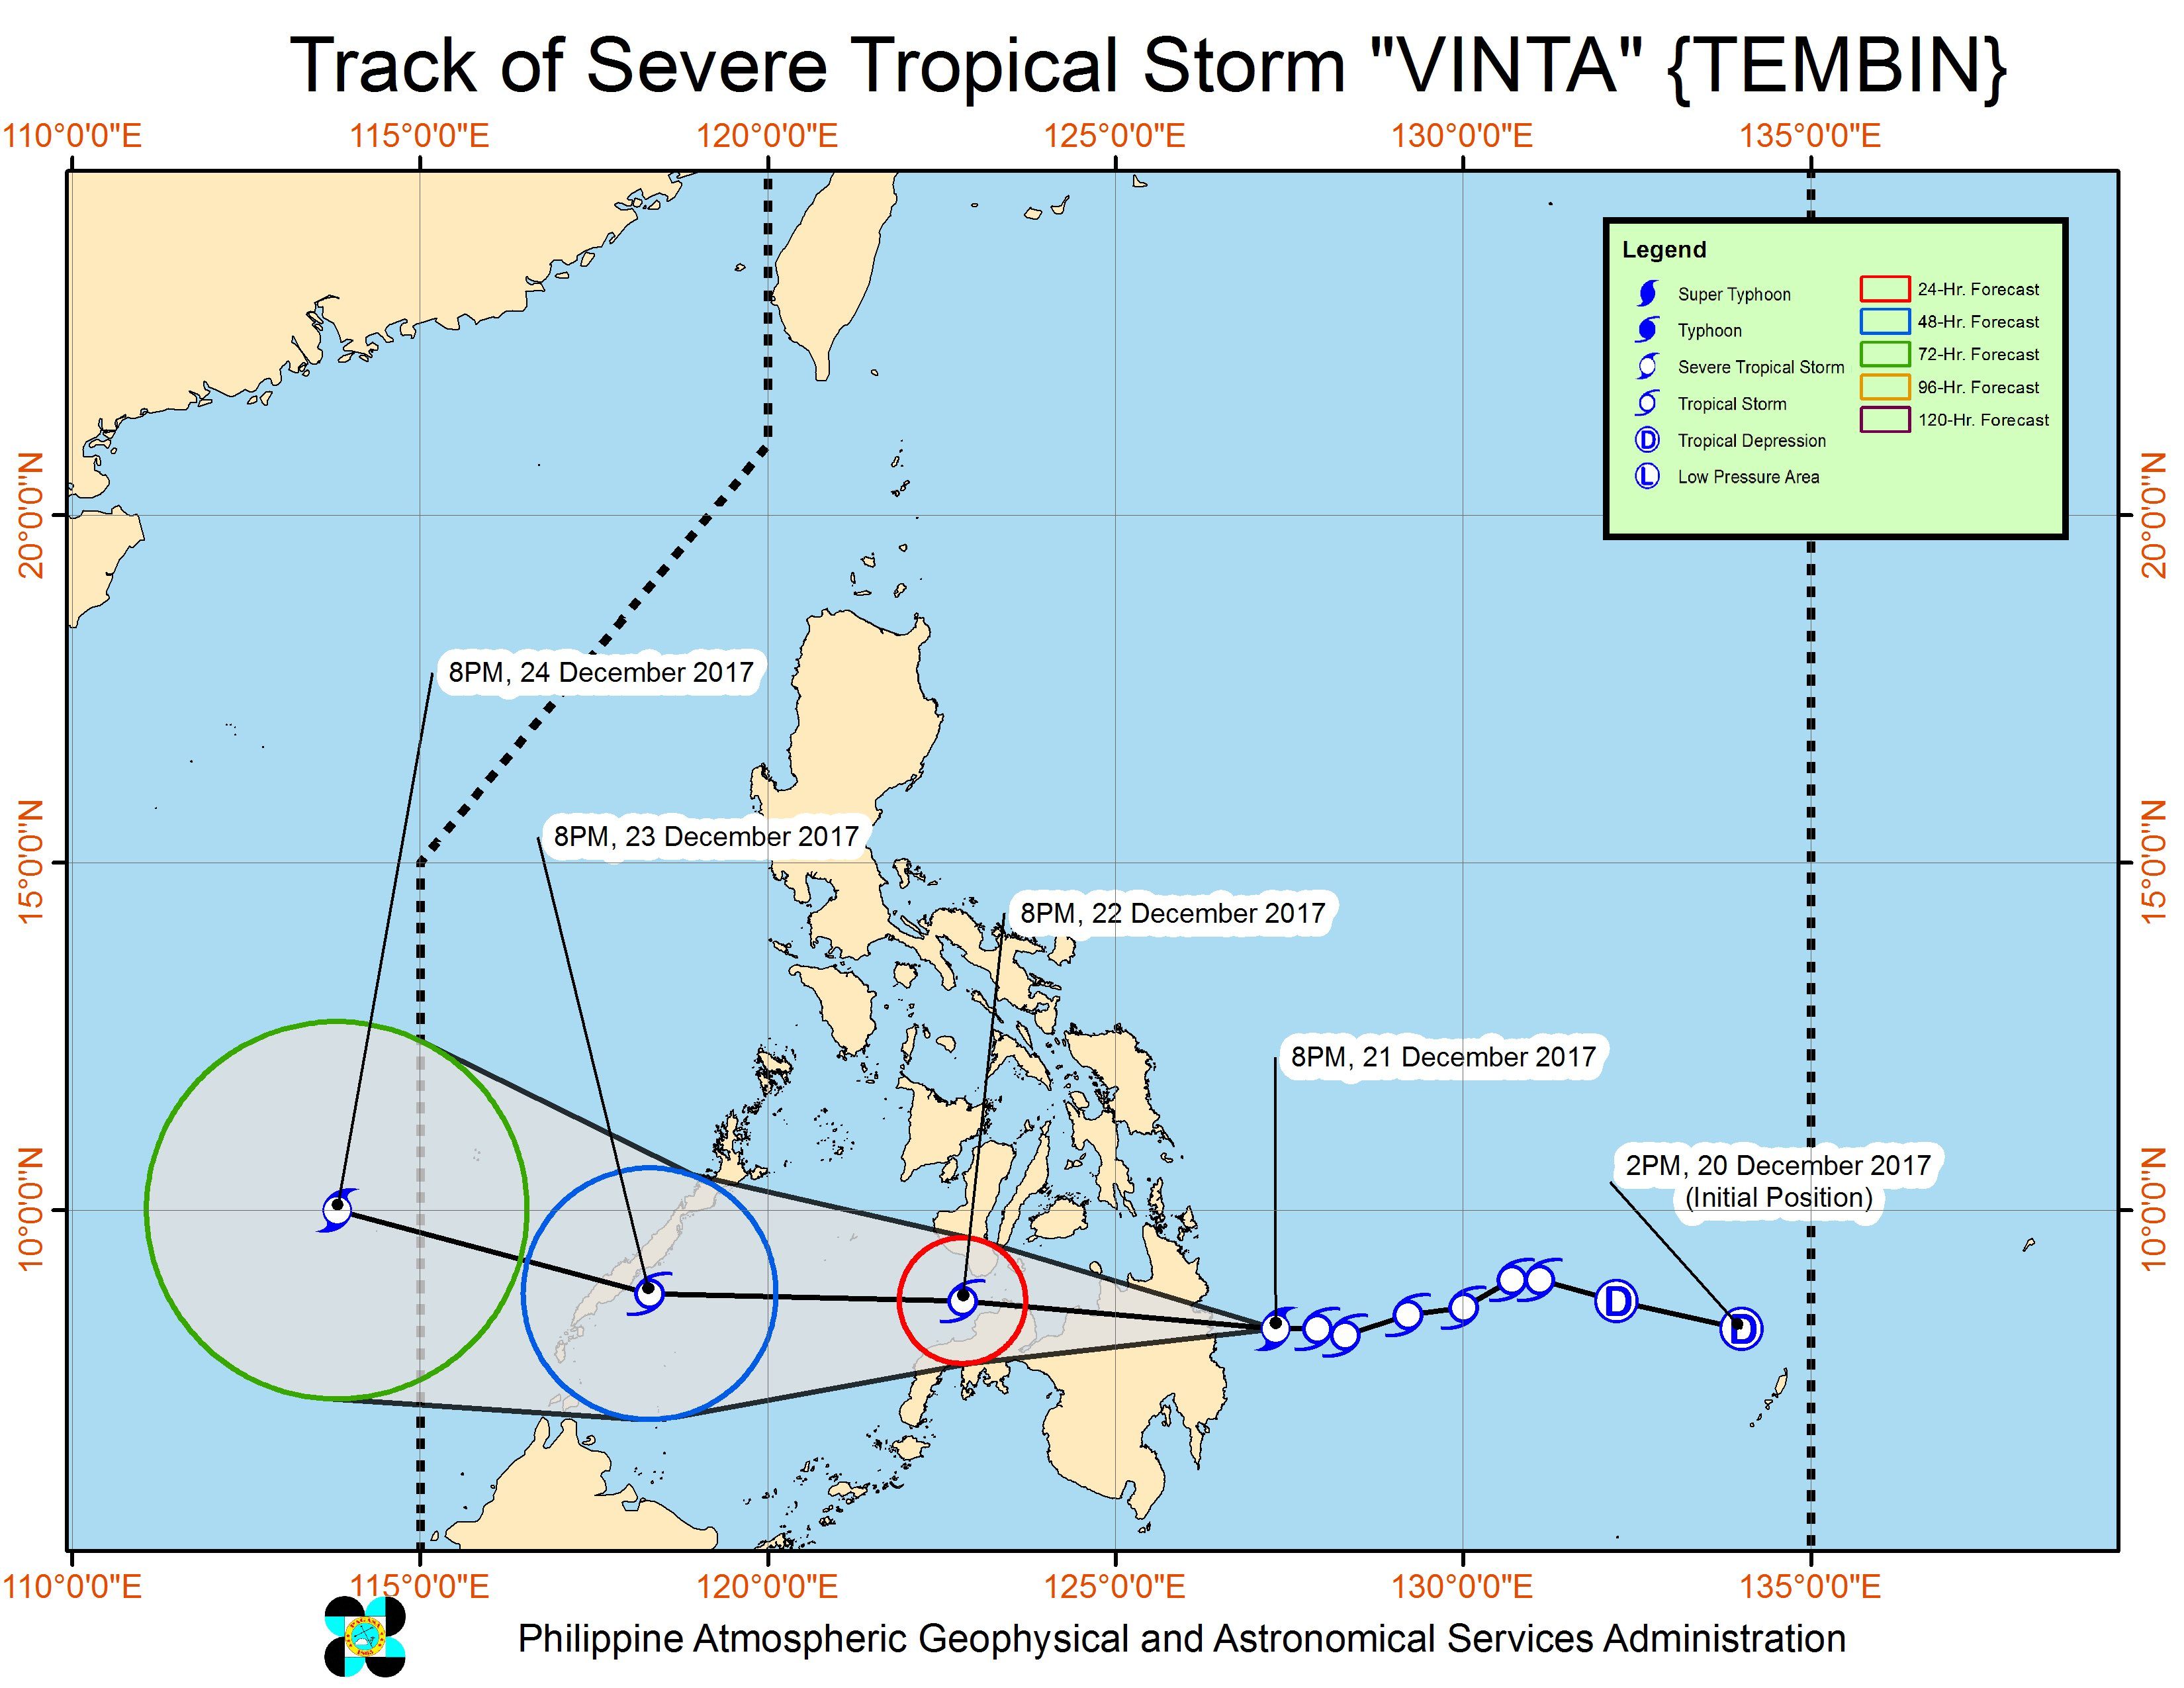 Forecast track of Severe Tropical Storm Vinta as of December 21, 11 pm. Image courtesy of PAGASA 